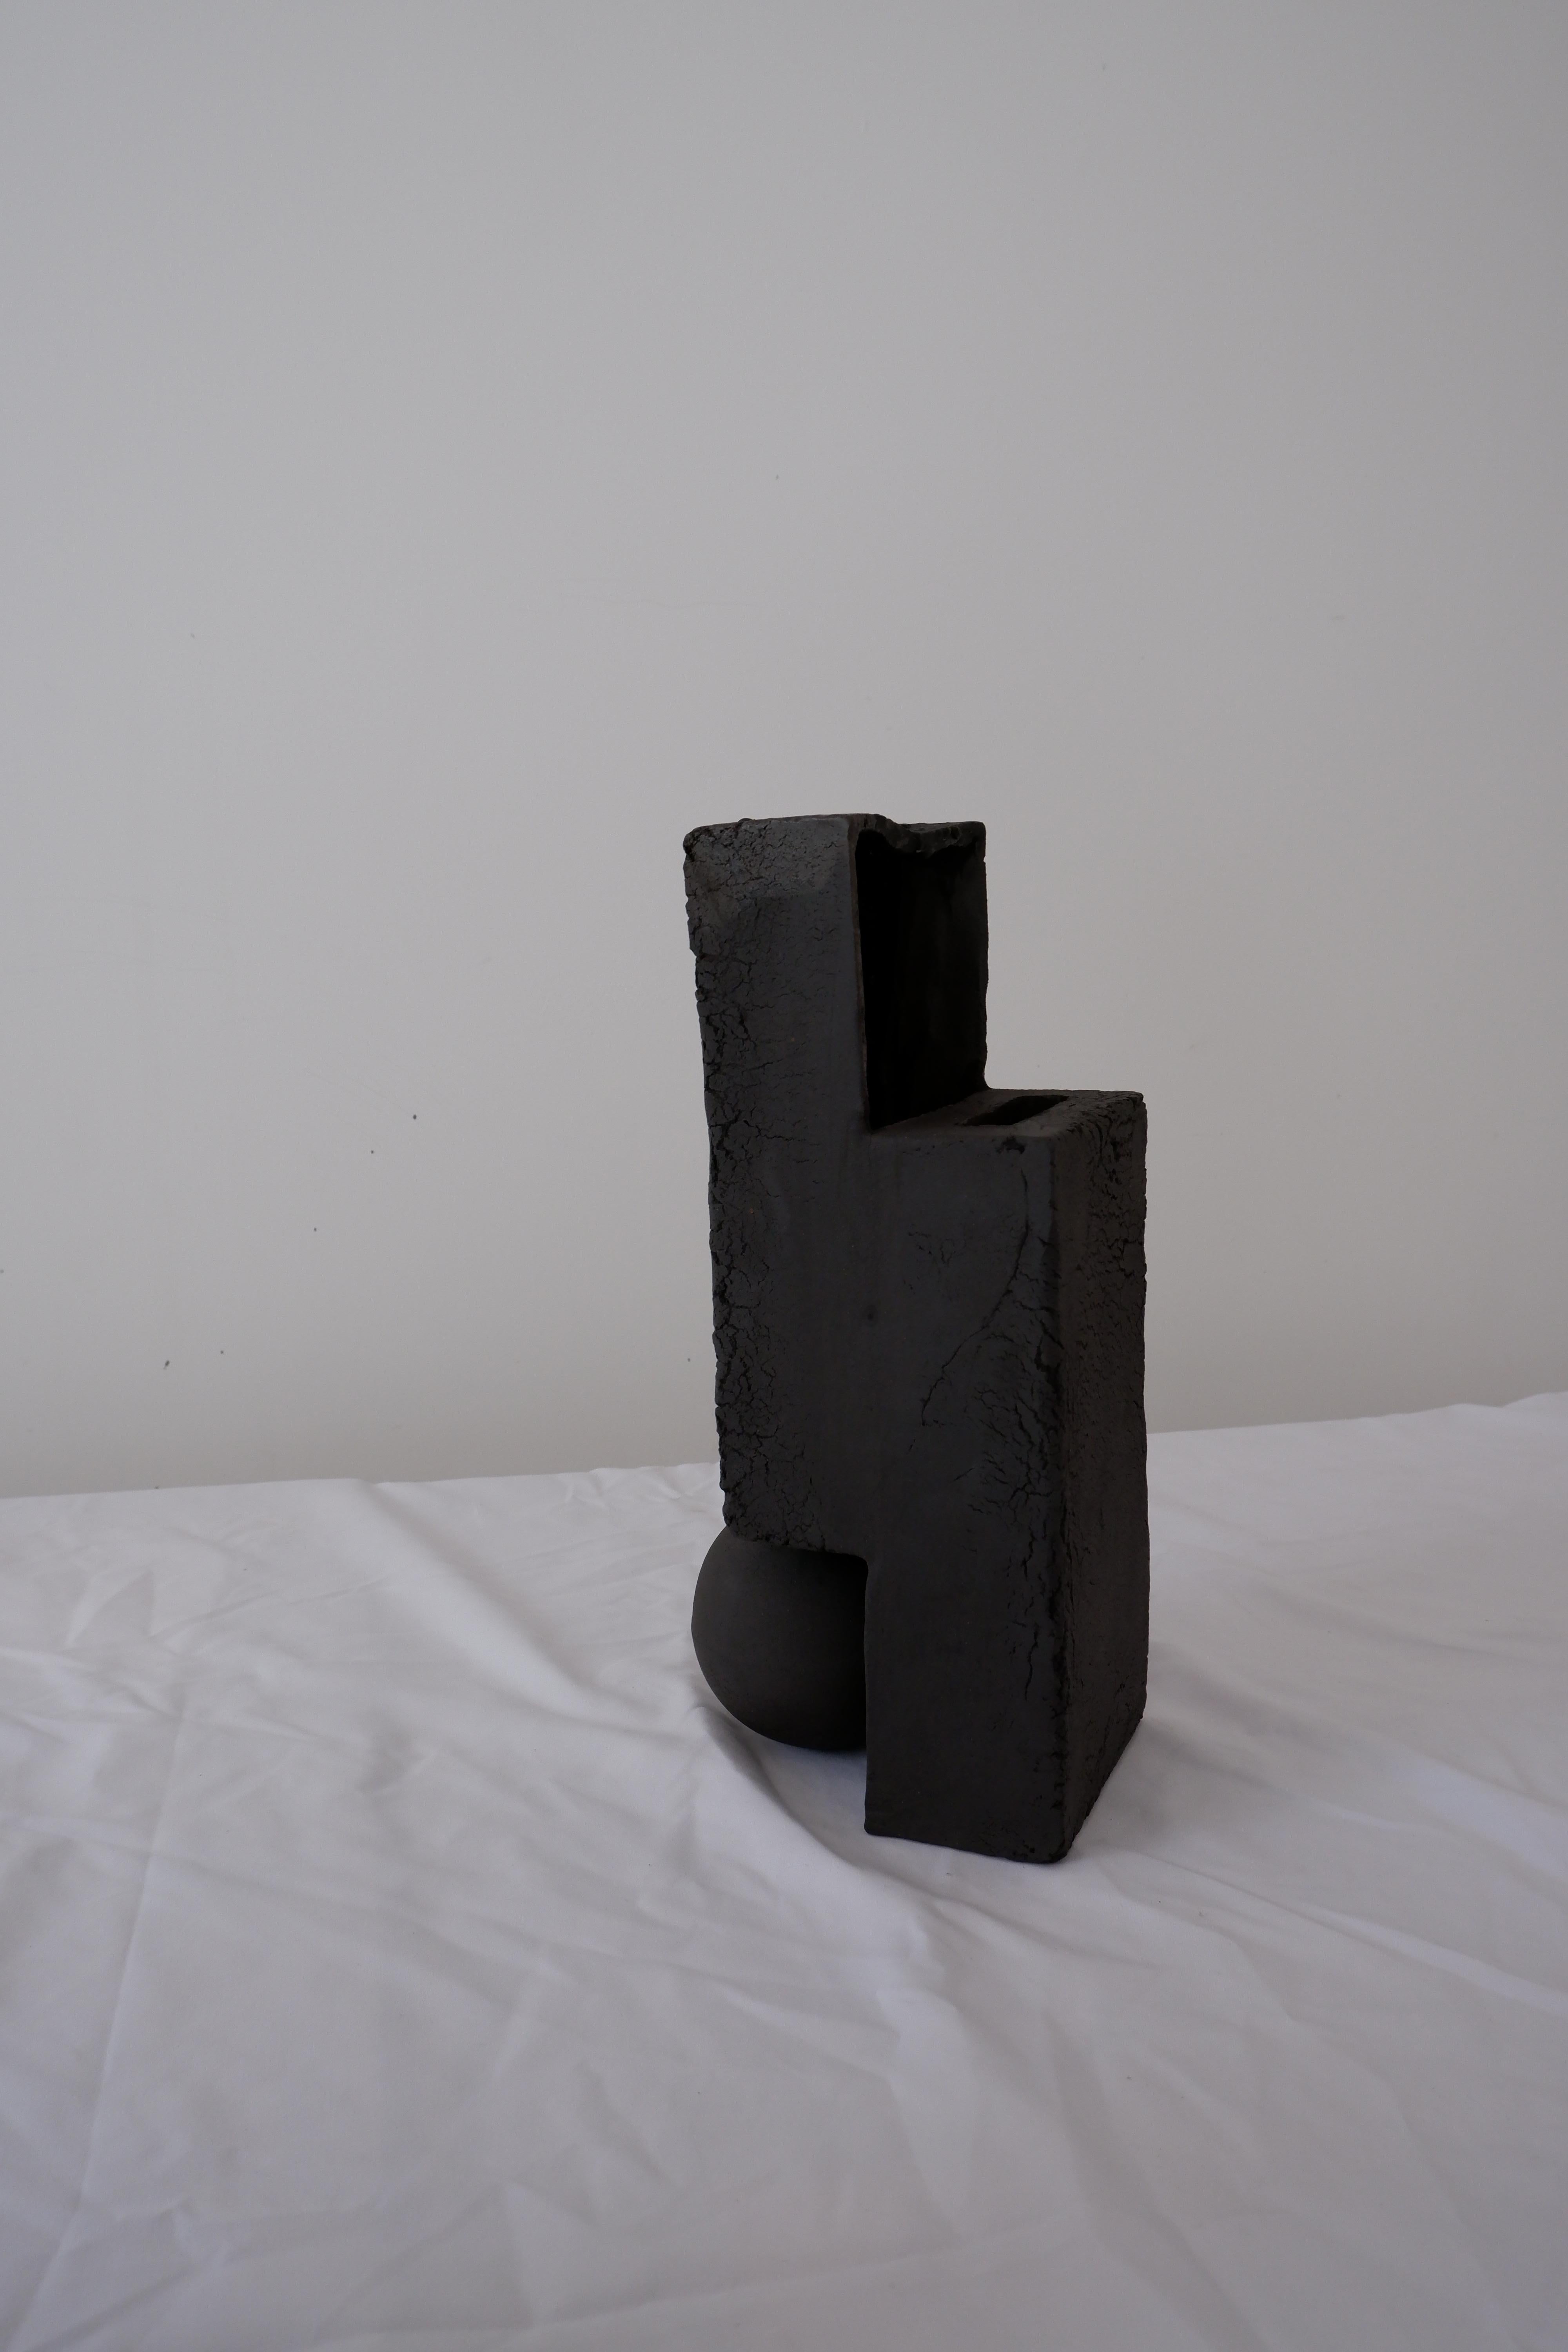 Slide Vase by Ia Kutateladze
One Of A Kind
Dimensions: W 12 x H 32 cm.
Materials: Black clay.

Handbuilt from black clay. Each piece is one of a kind, due to its free hand-building process. Different color variations available: raw black clay, raw